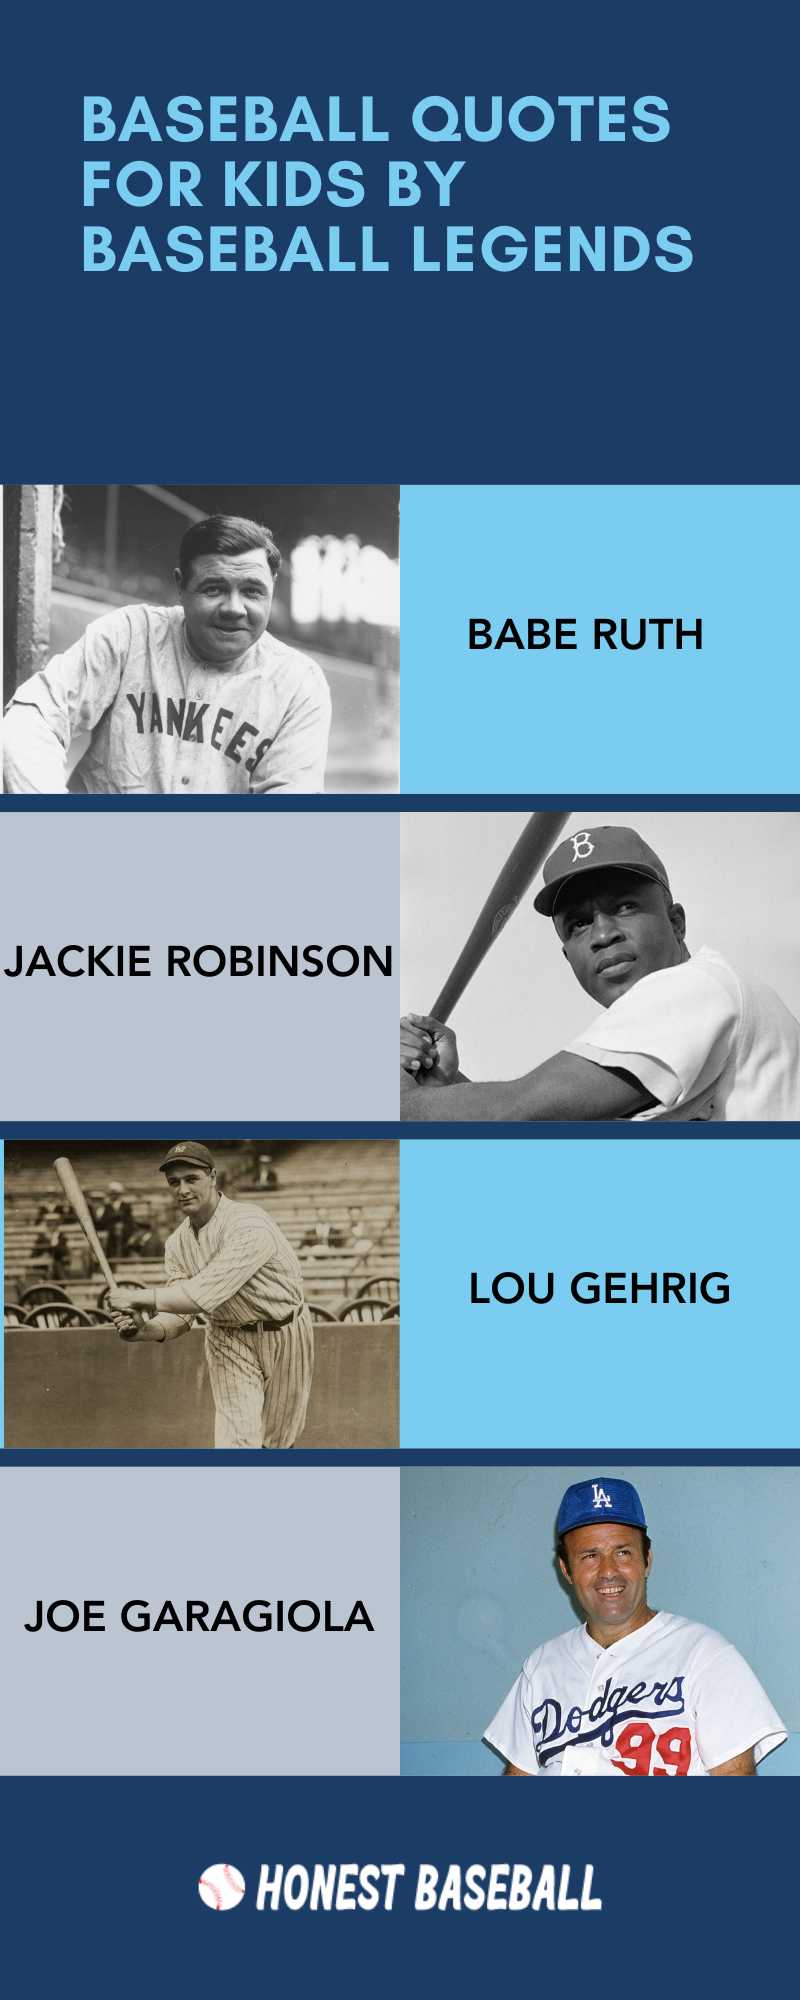 Baseball Quotes for Kids by Baseball Legends